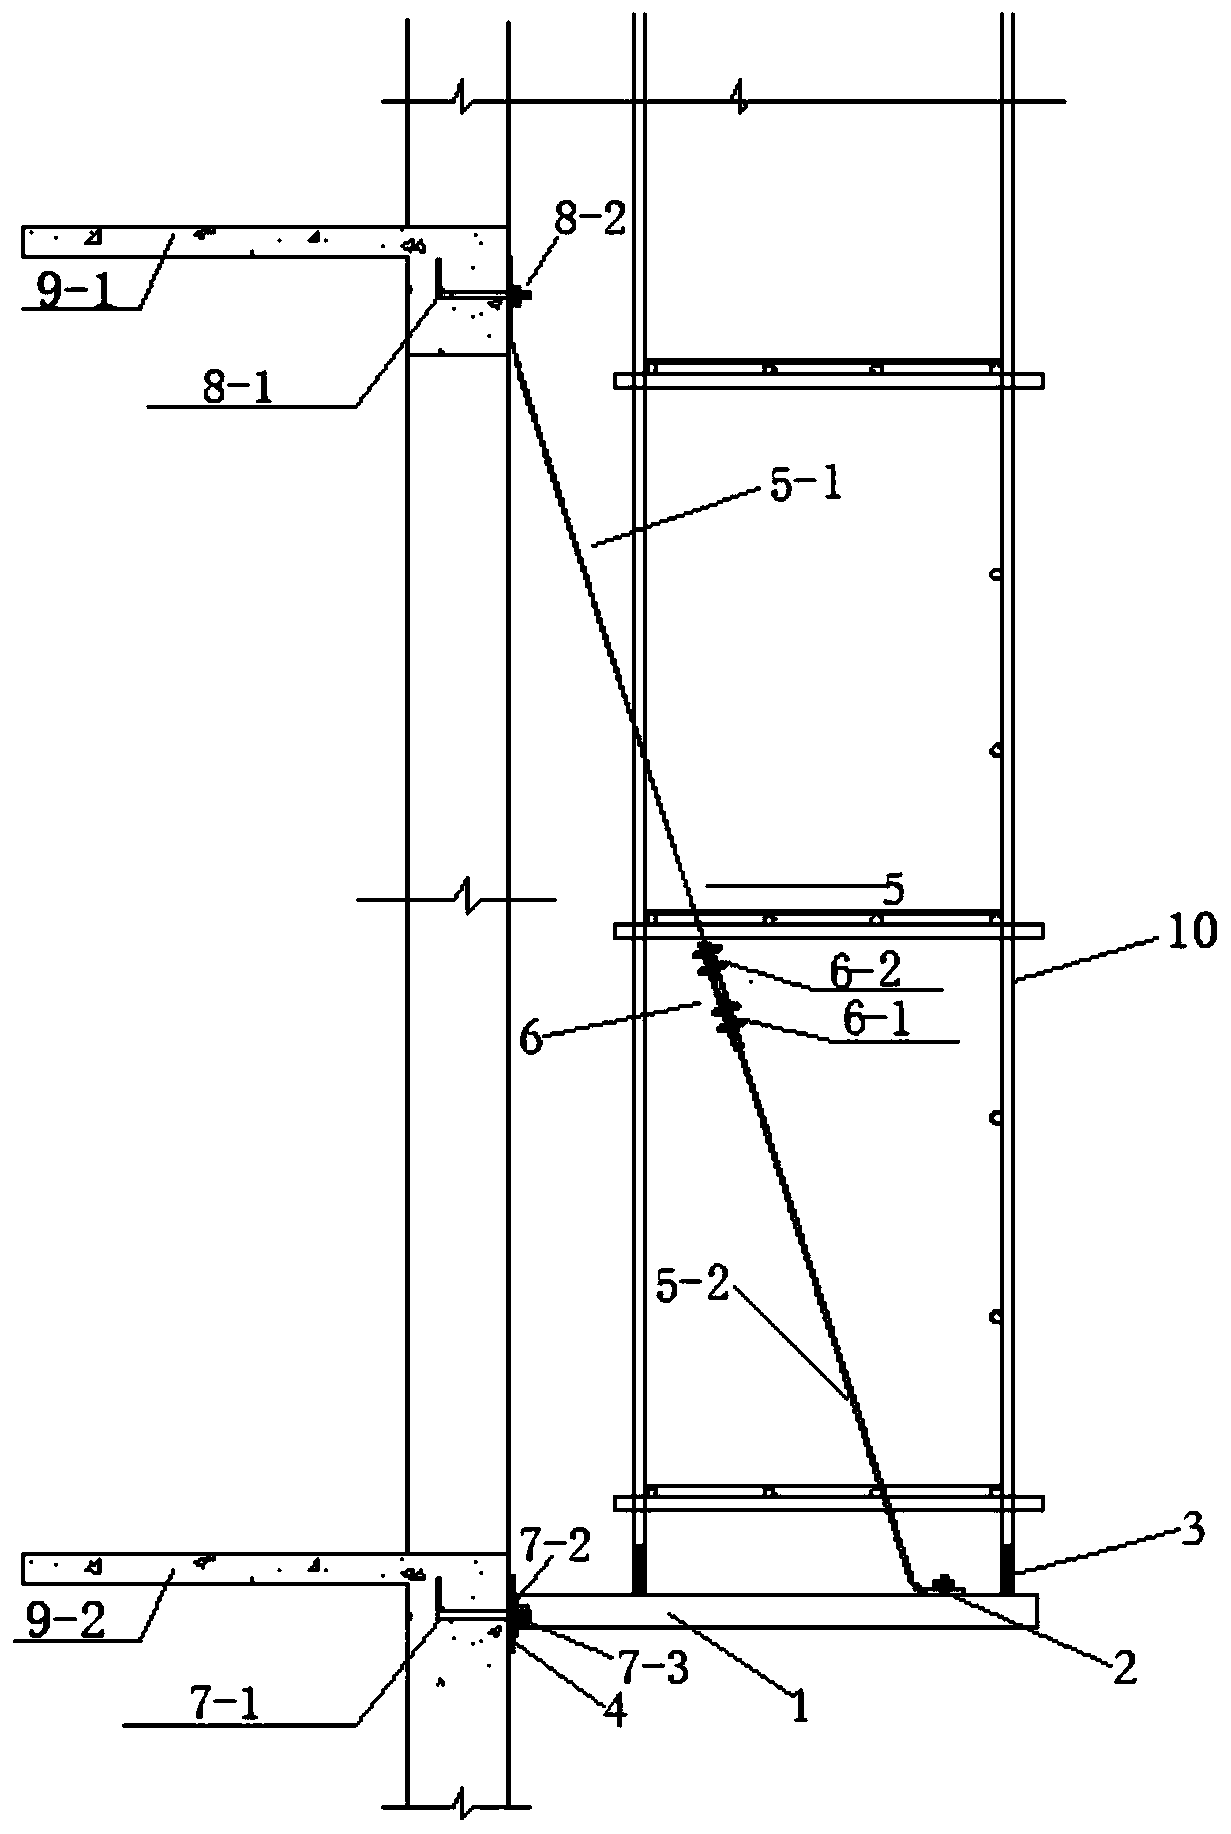 Supporting device for fabricated cantilever scaffold and construction method thereof